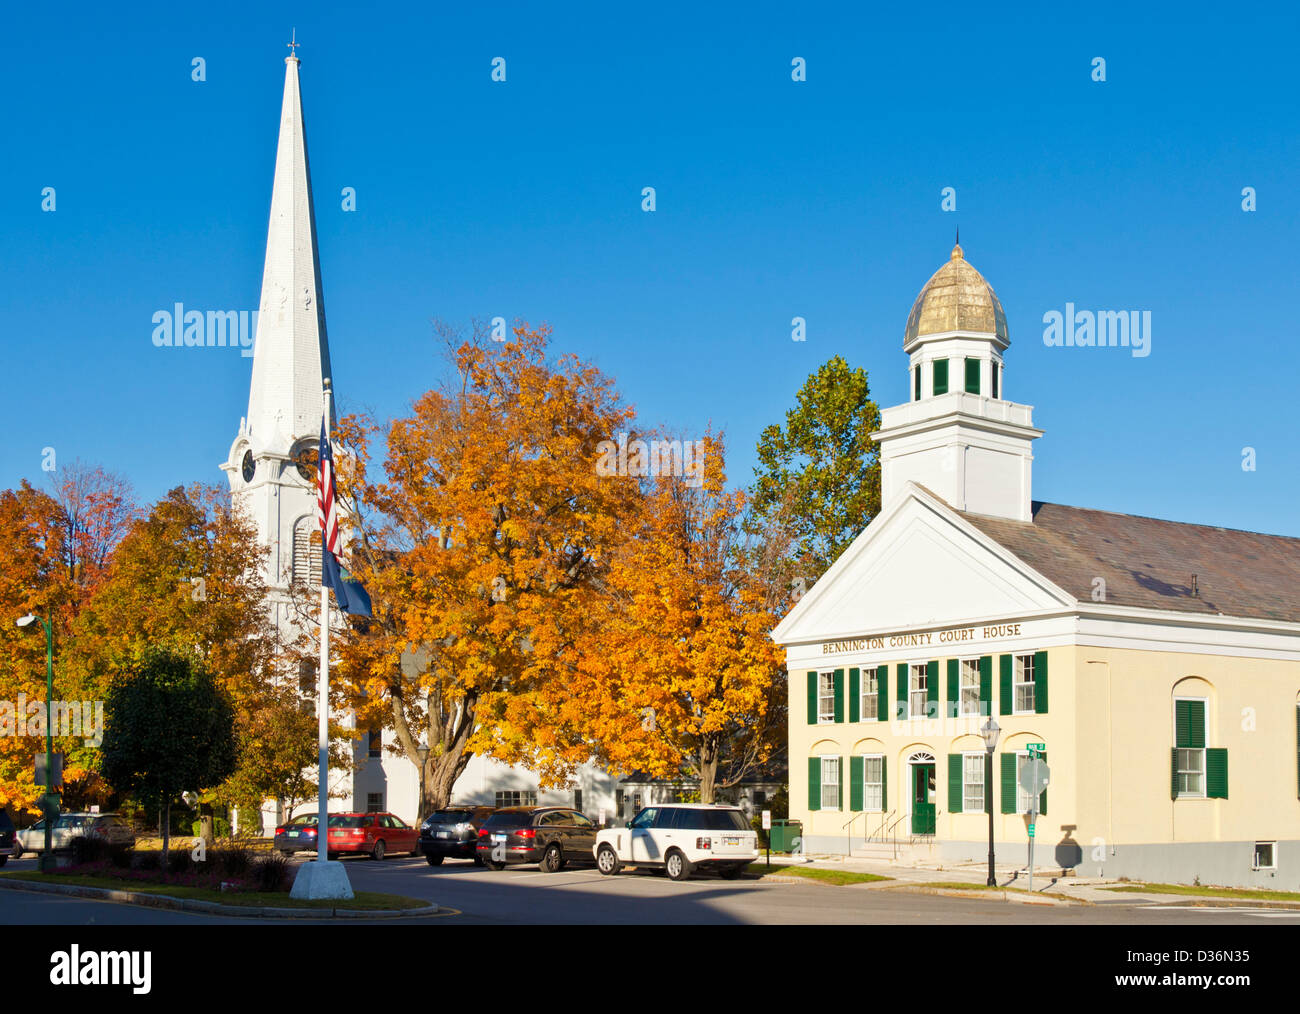 Bennington County court house and white clad church Manchester Vermont United States of America USA North america Stock Photo